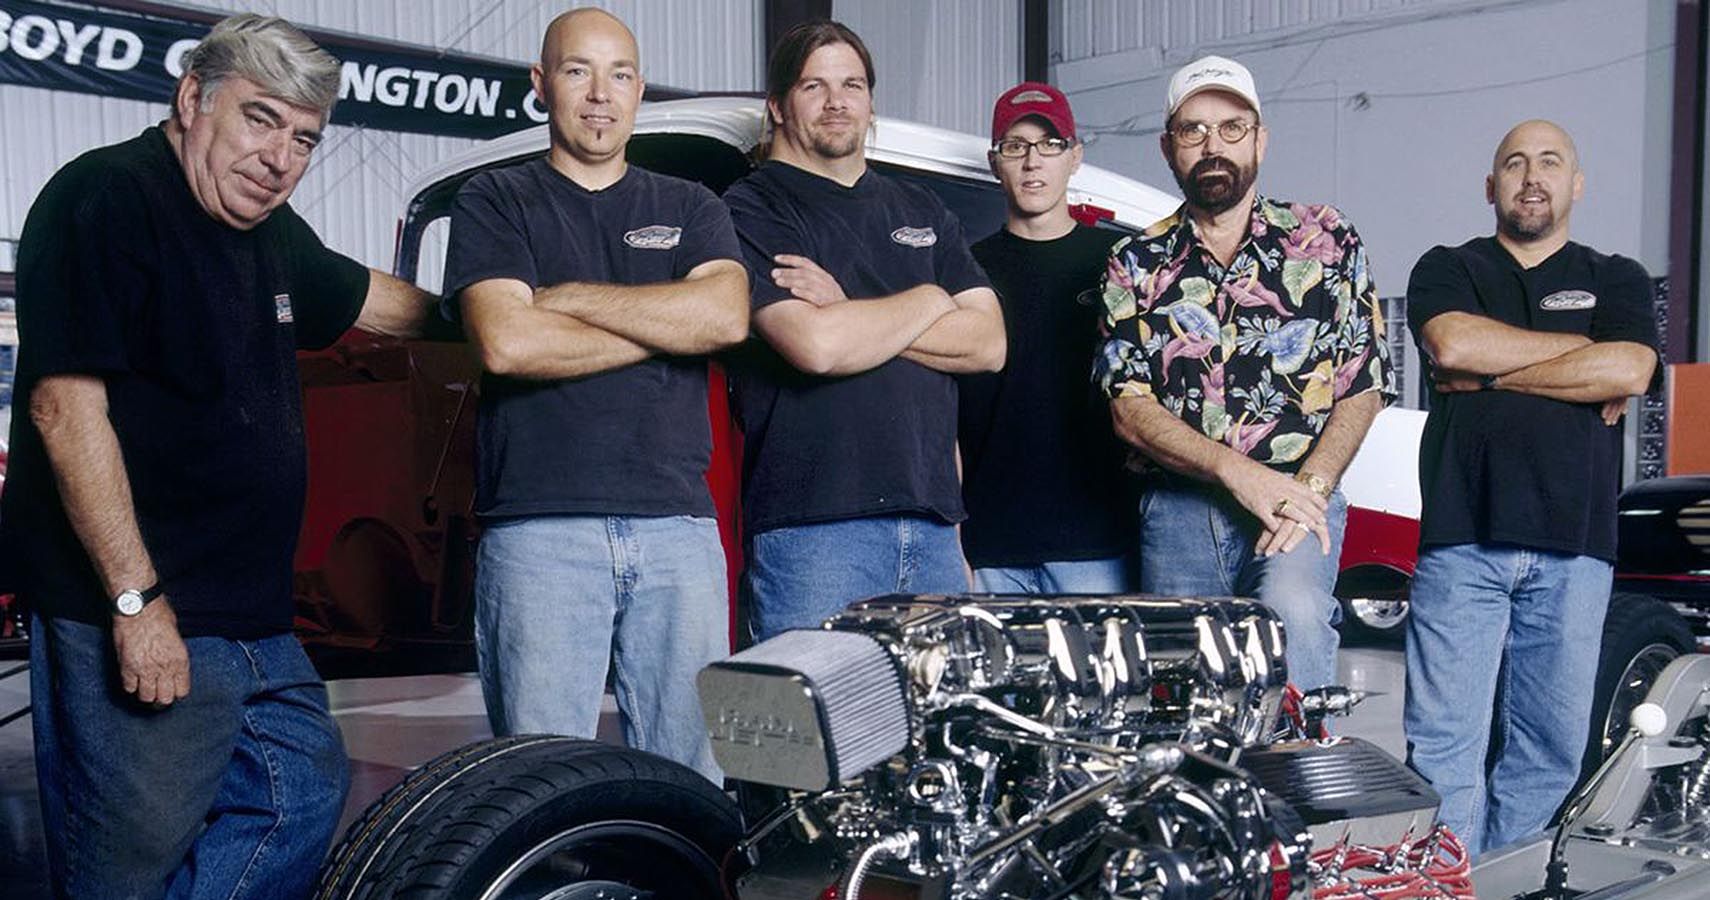 American Hot Rod: The Time Boyd Coddington Was Up & At It